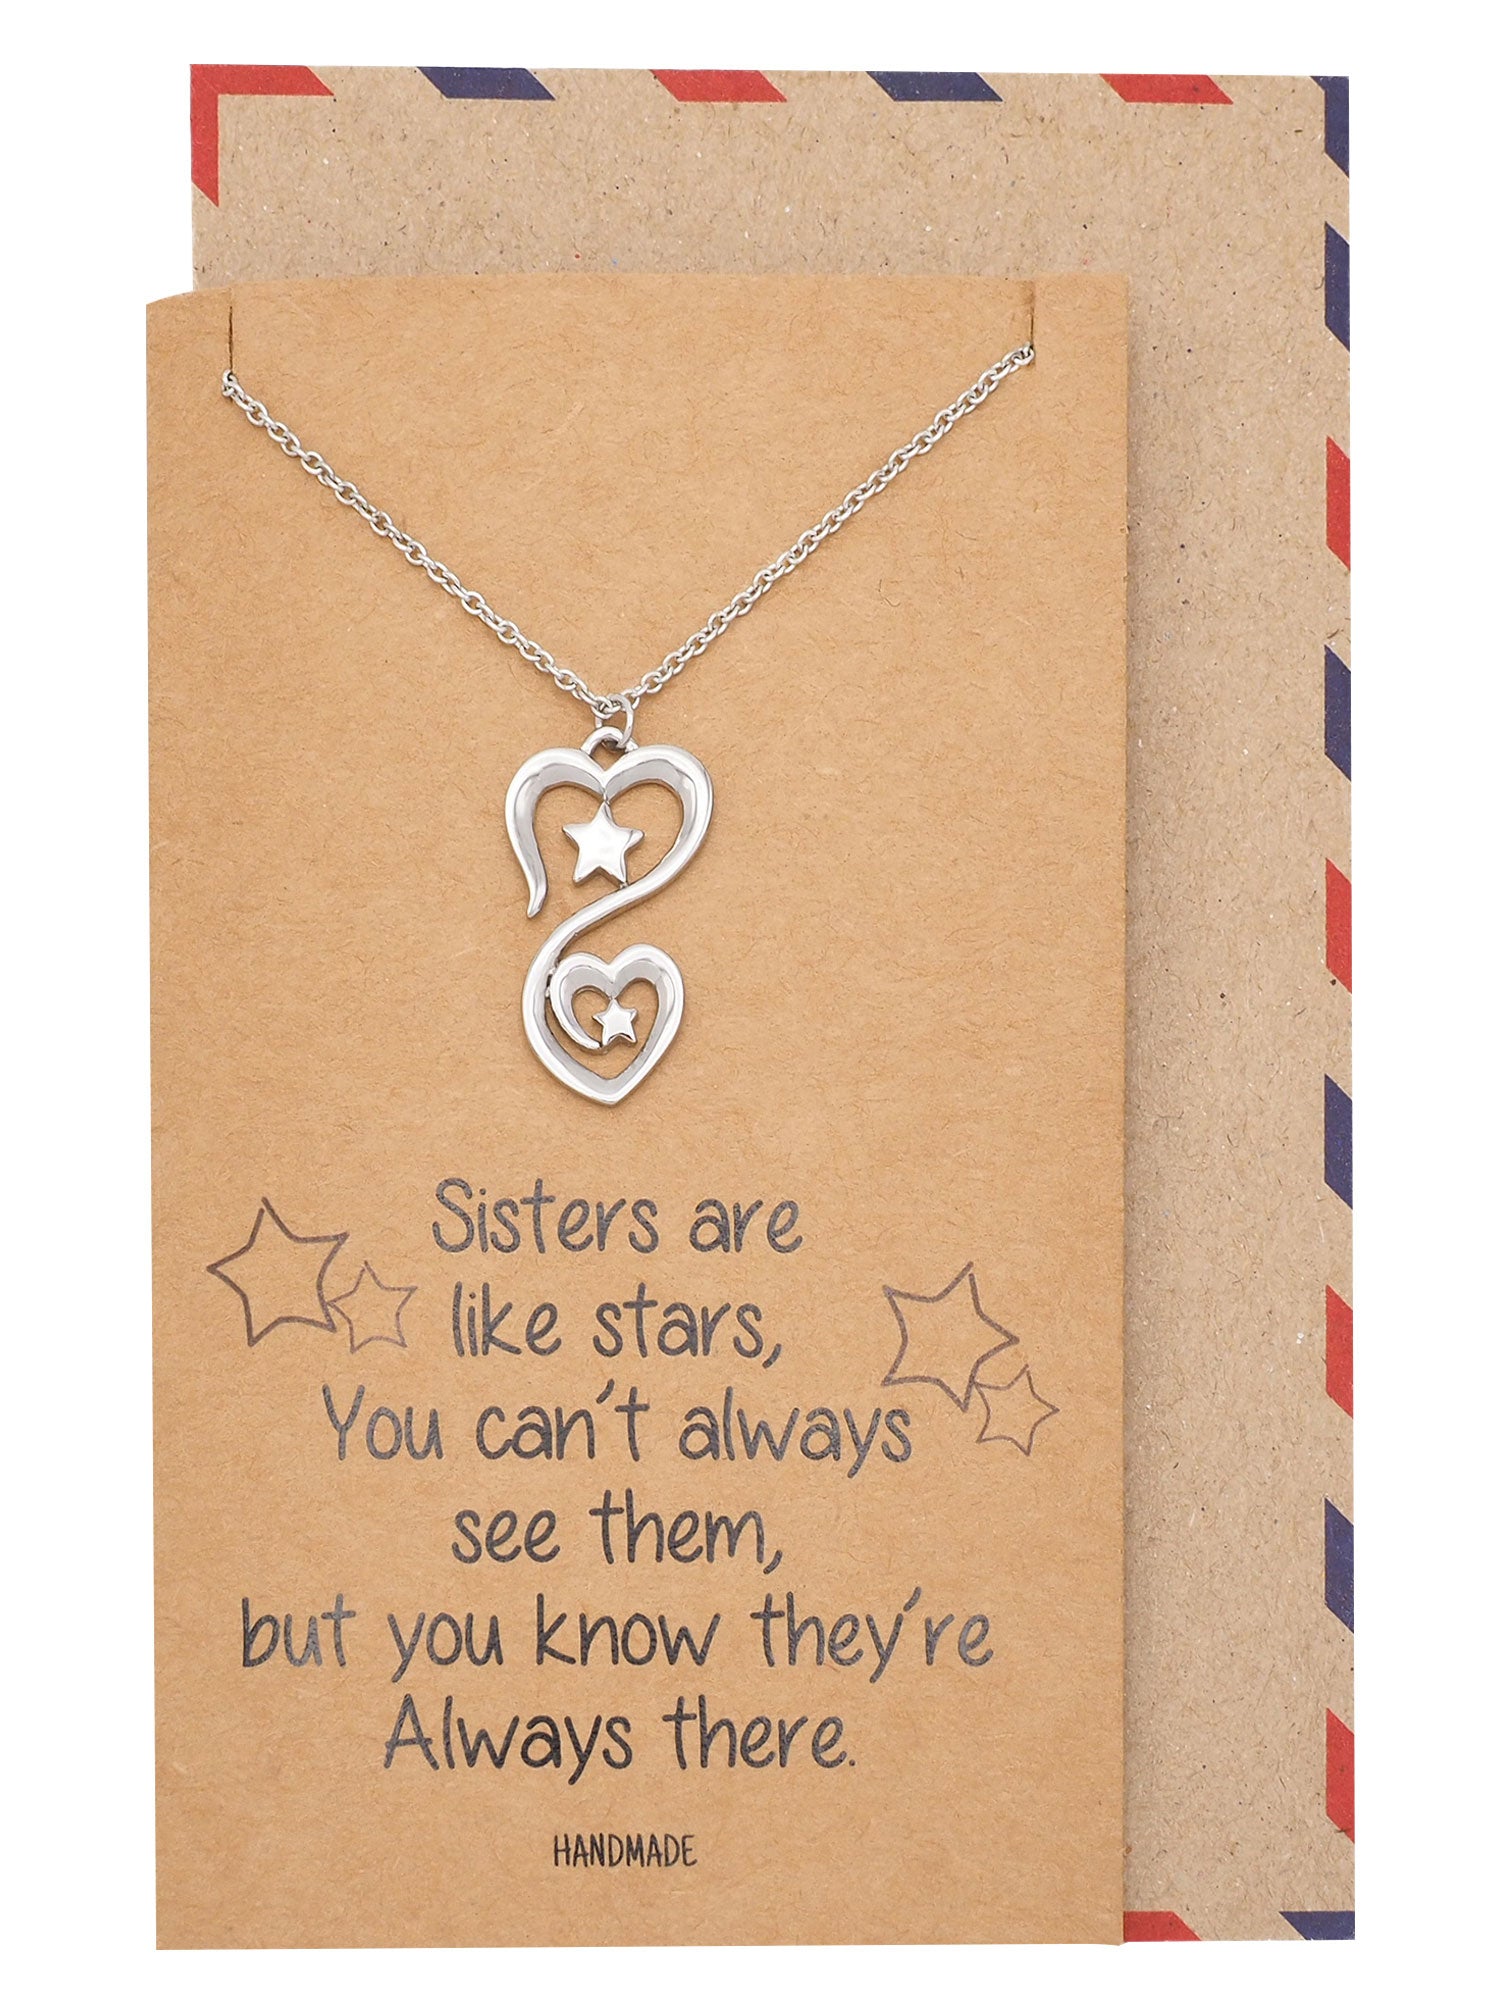 Big Sister Middle Sister Little Sister Pendant Necklace Heart BFF Chain  Simple Family Friends Jewelry Gift For Sisters From Ck02, $4.83 | DHgate.Com